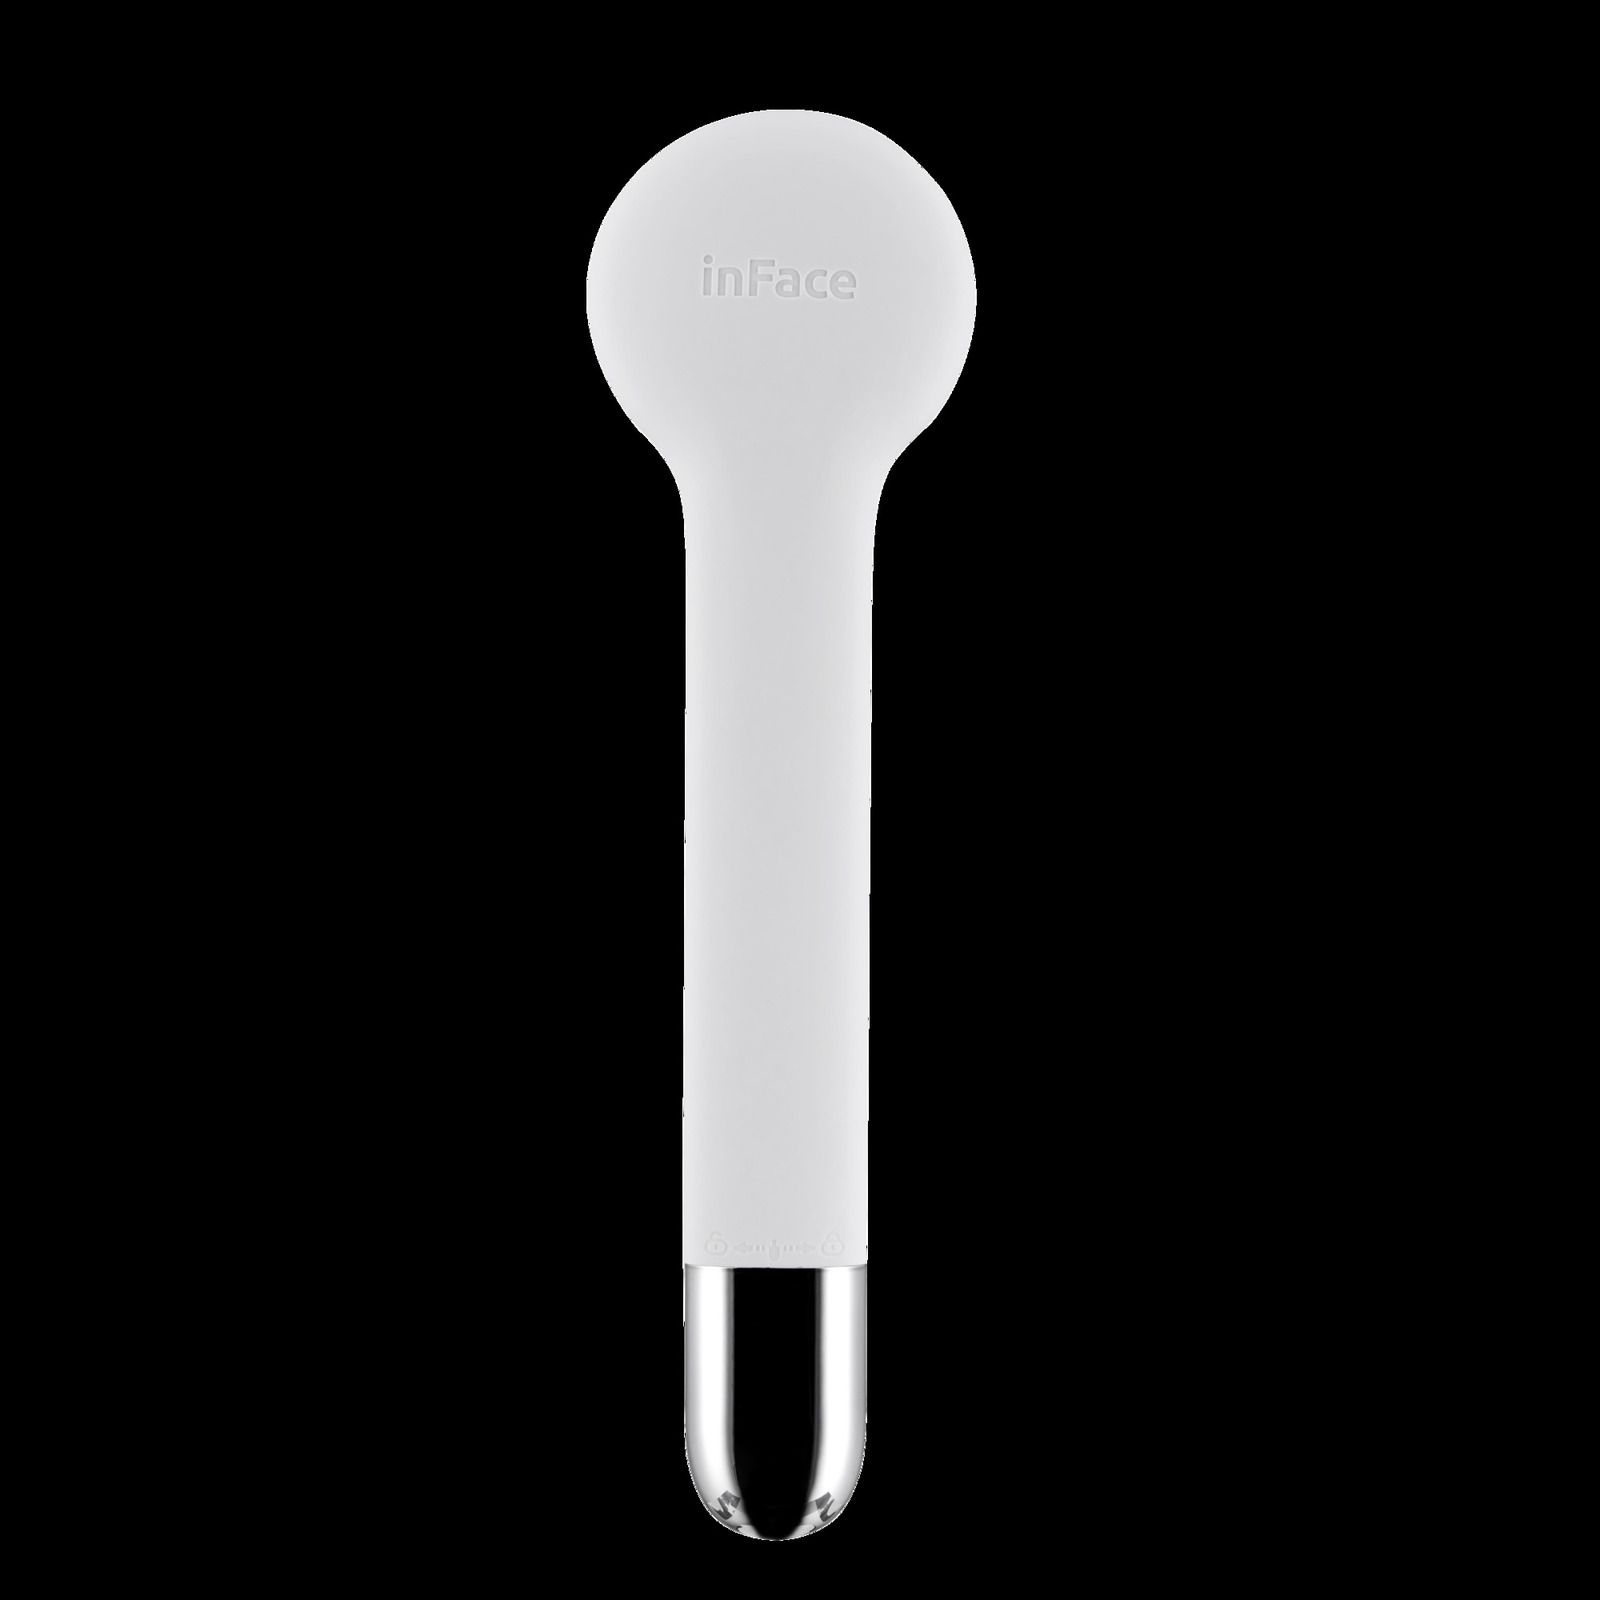 Cleaning Tools Accessories InFace Shower Massage Electric Bath Brush Body  Scrubber Acne Exfoliating Brushes IPX7 Waterproof With 4 Heads 230829 From  Bei07, $59.09